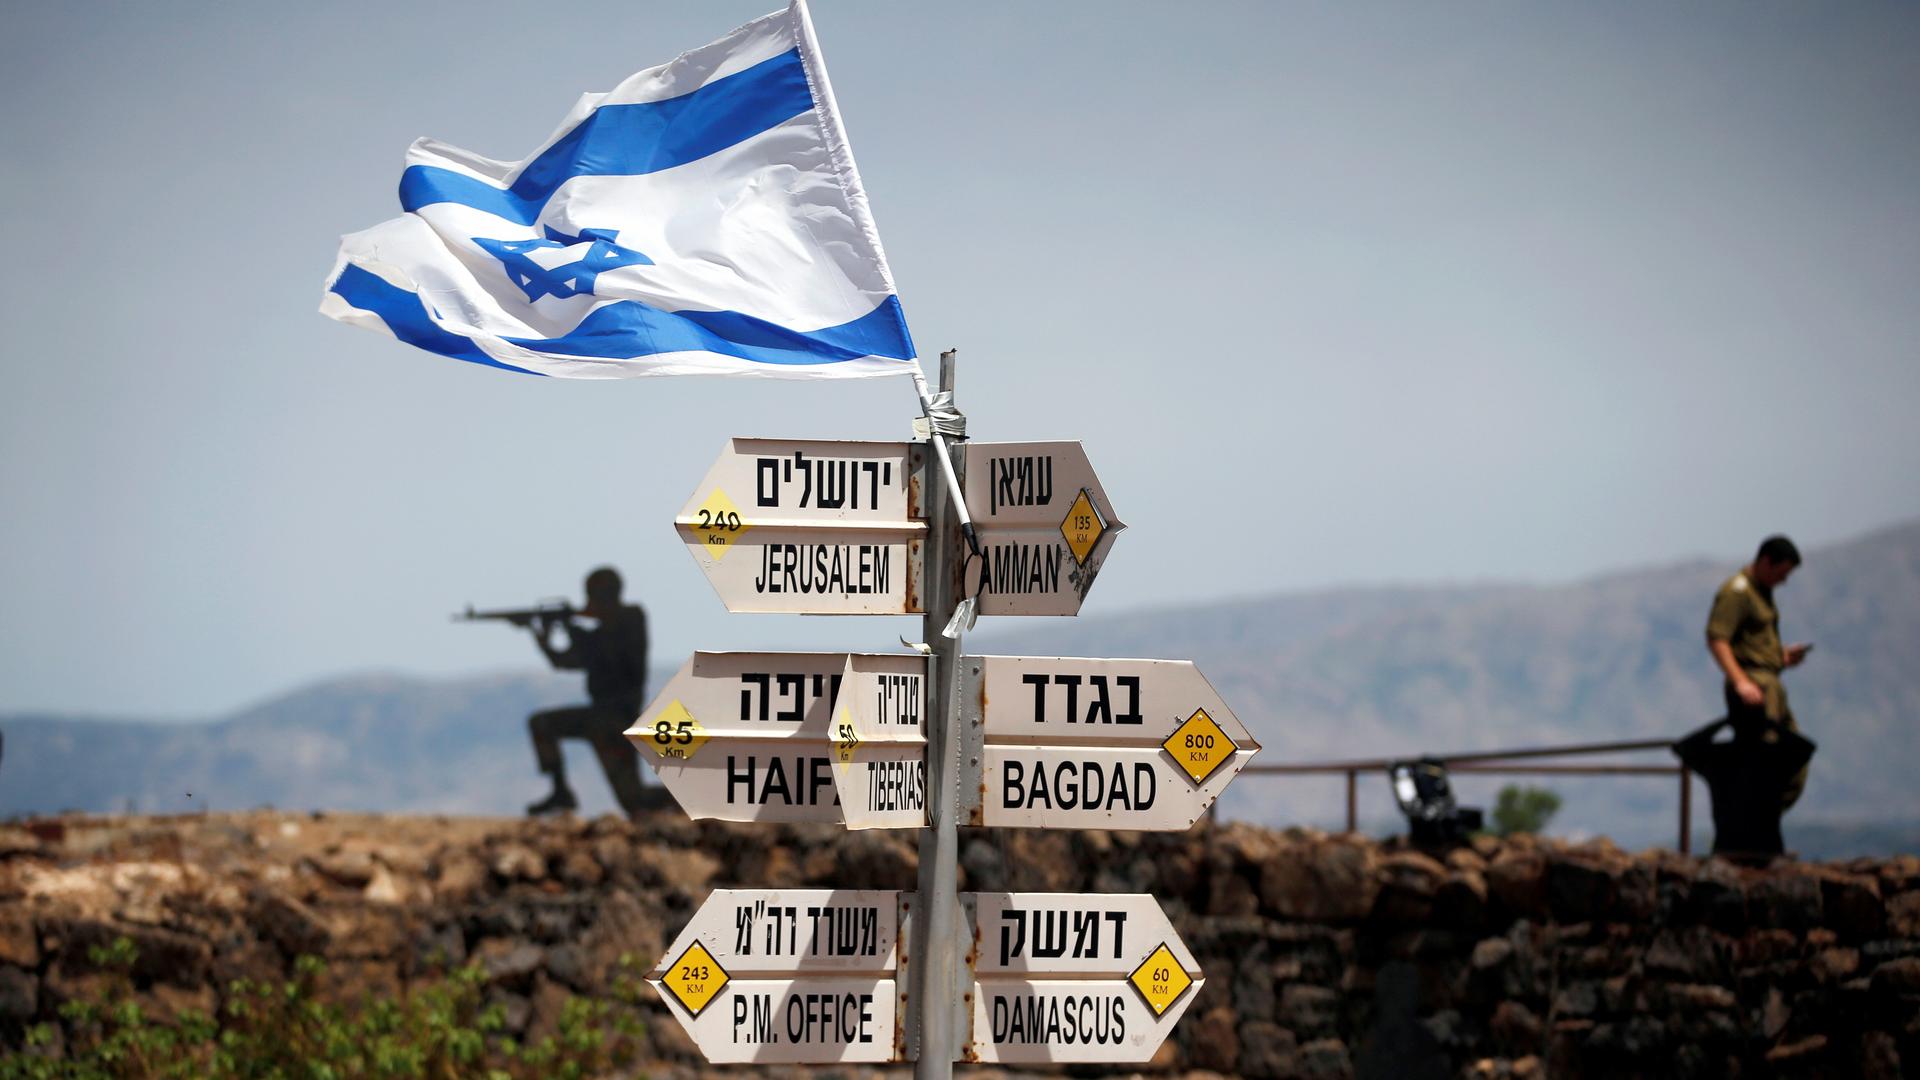 An Israeli soldier stands next to signs pointing out distances to different cities, on Mount Bental, an observation post in the Israeli-occupied Golan Heights that overlooks the Syrian side of the Quneitra crossing, Israel May 10, 2018.